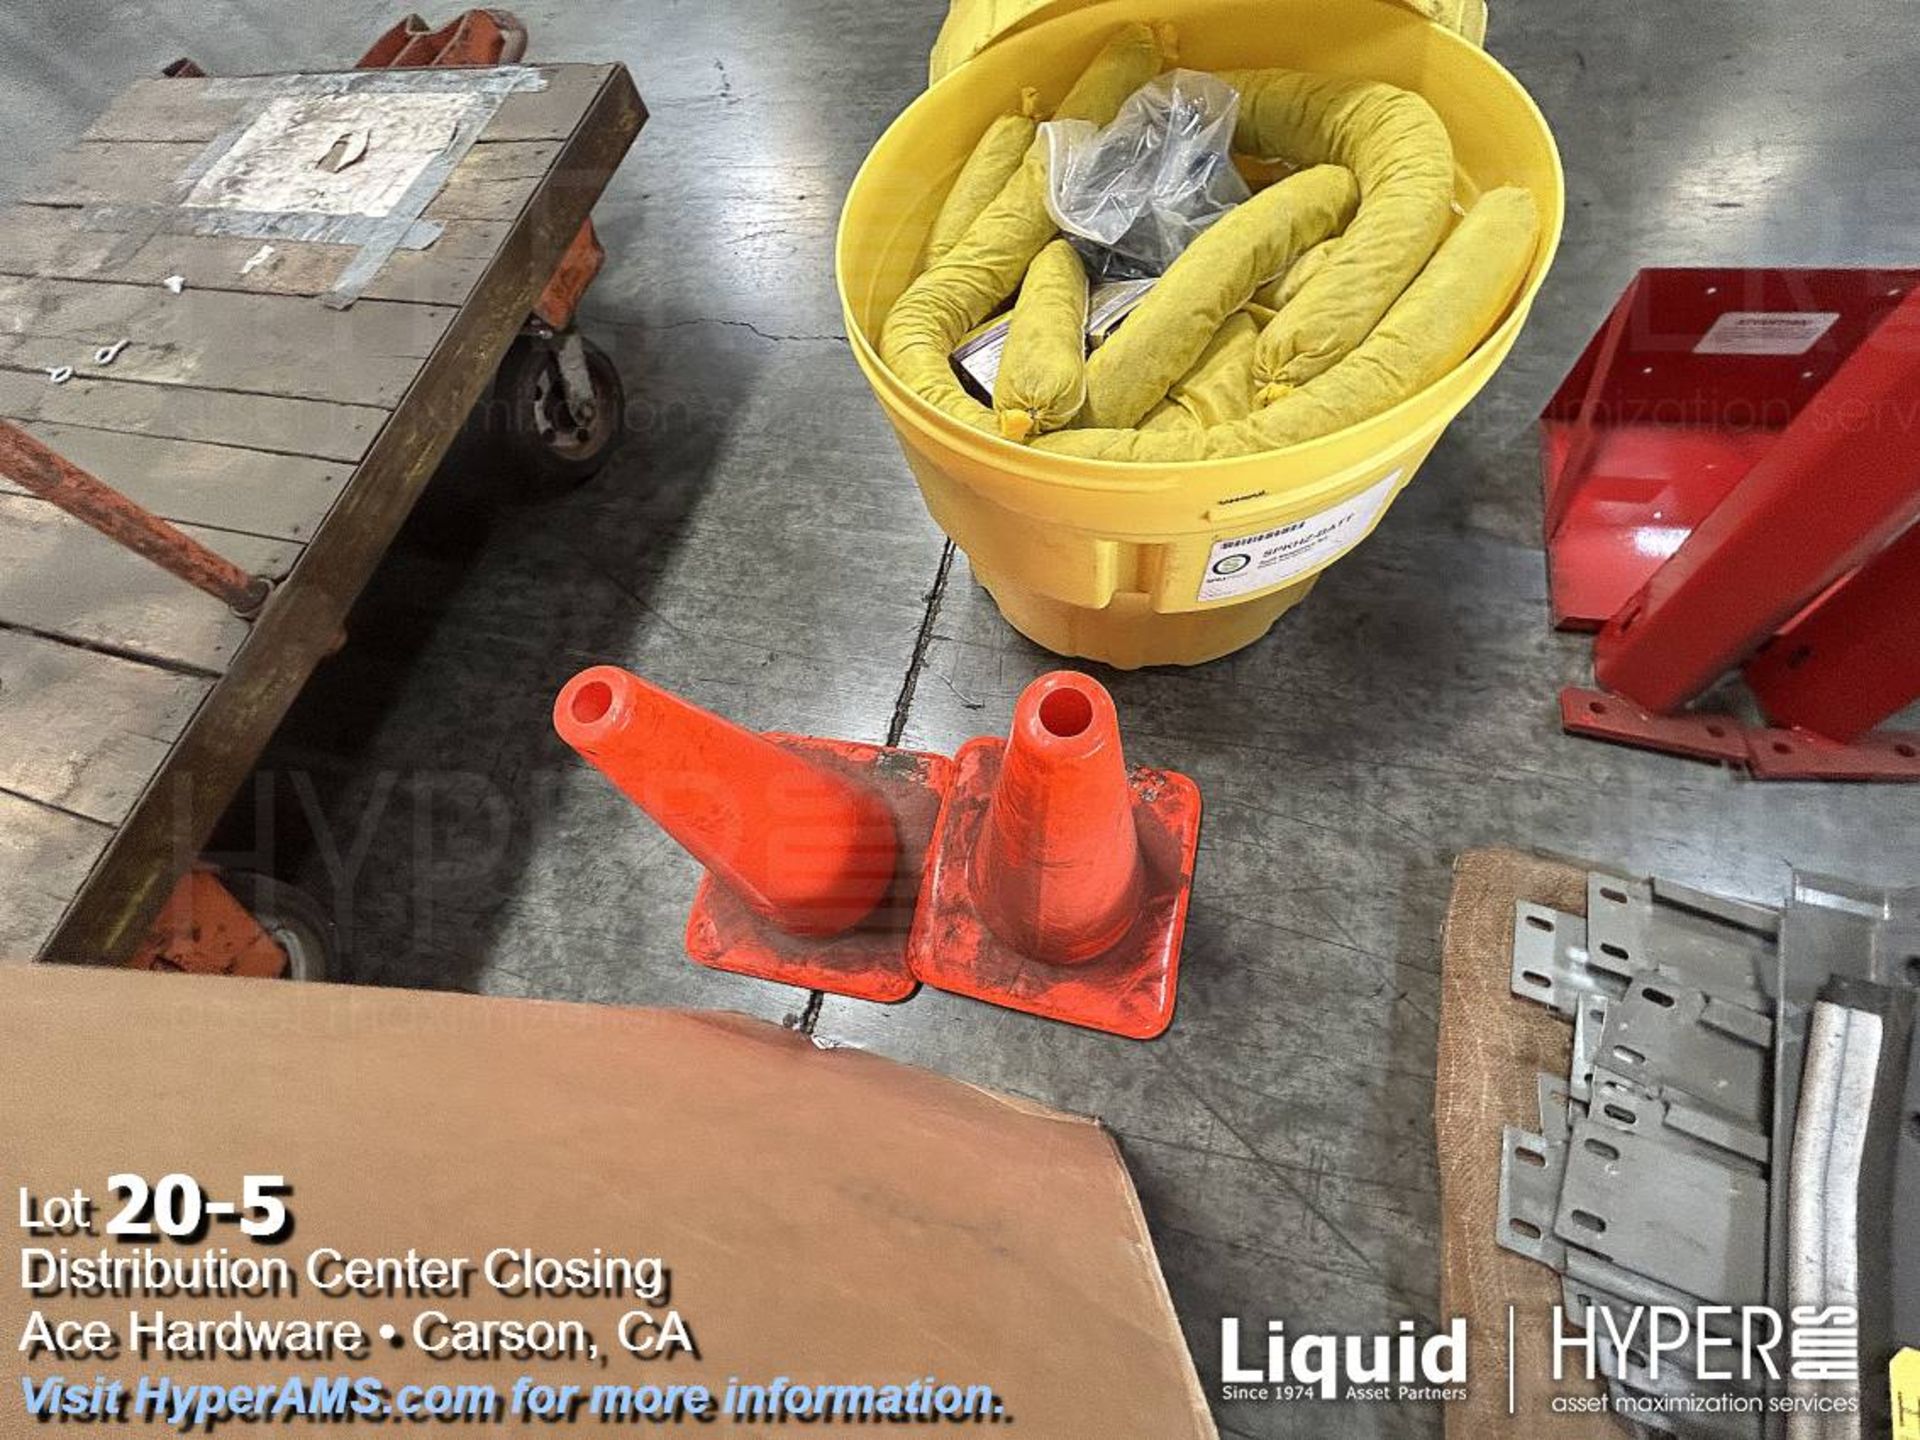 Lot: Safety cones, and spill kit - Image 5 of 5